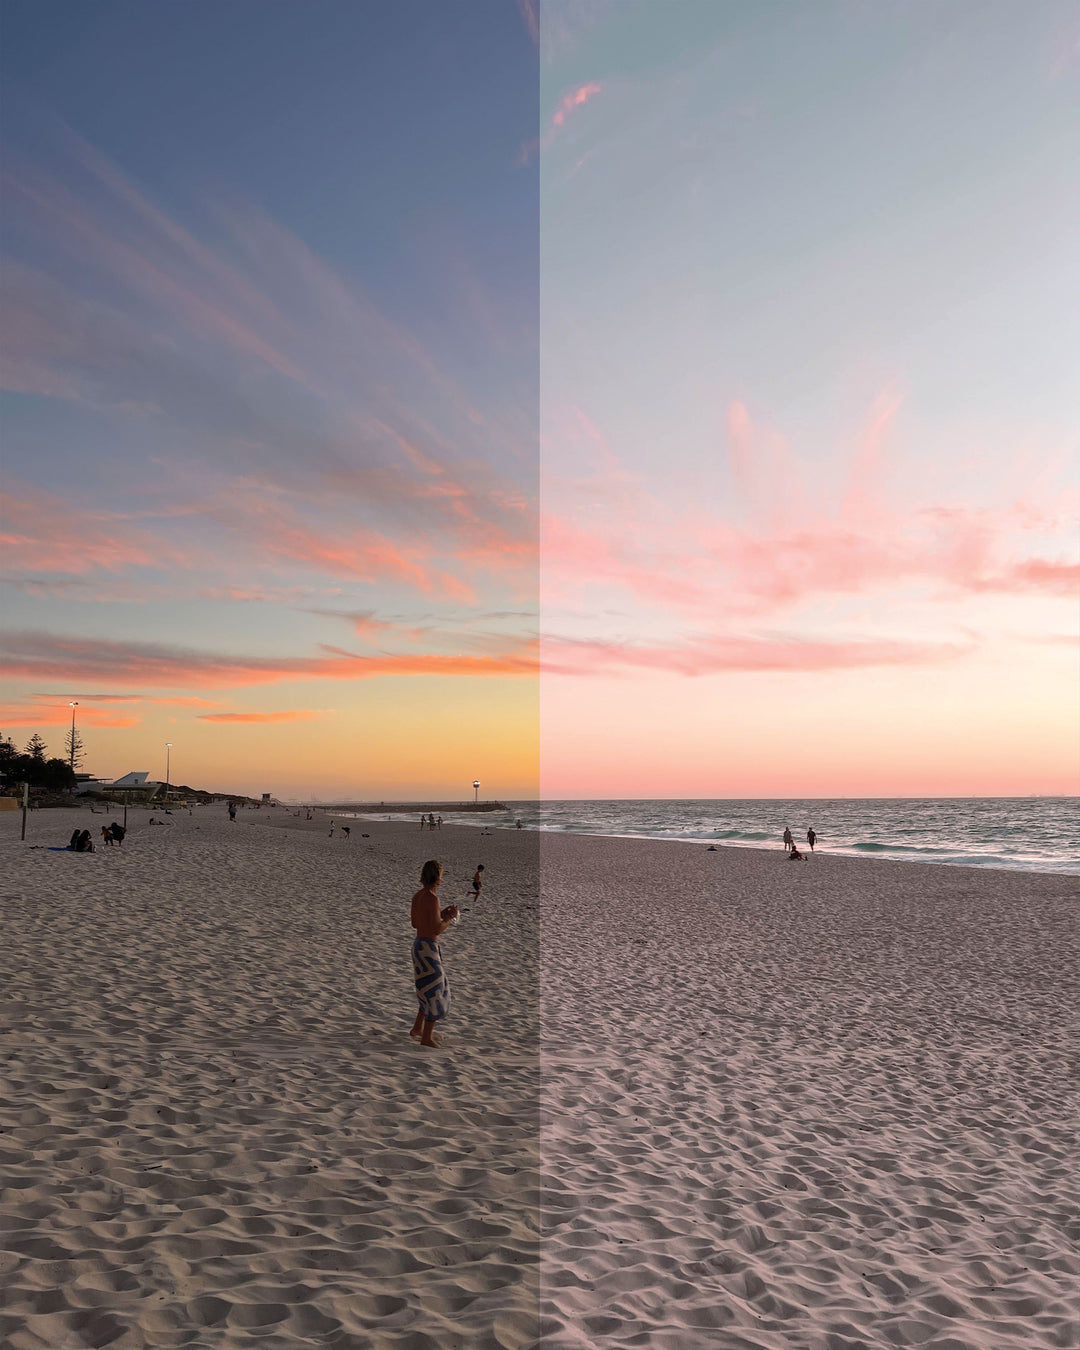 Dreamy Sunsets - Preset pack